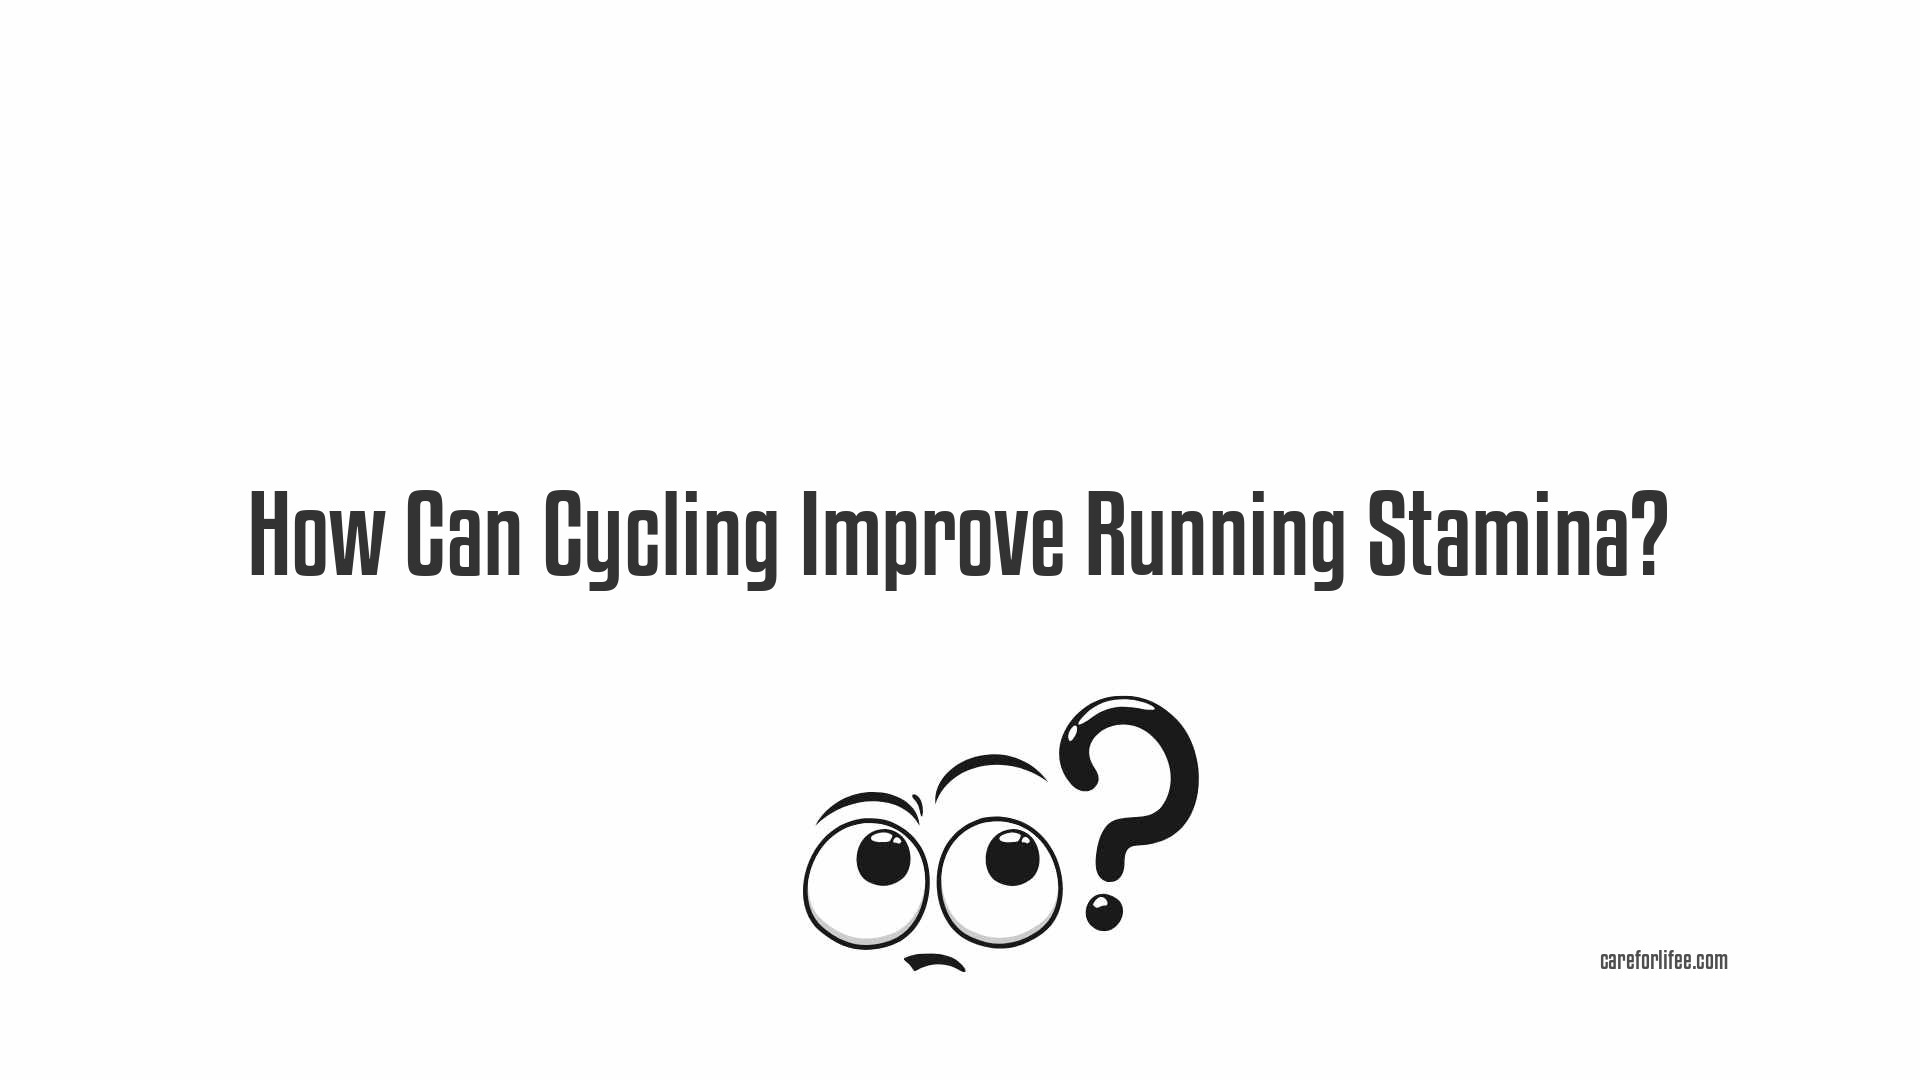 How Can Cycling Improve Running Stamina?